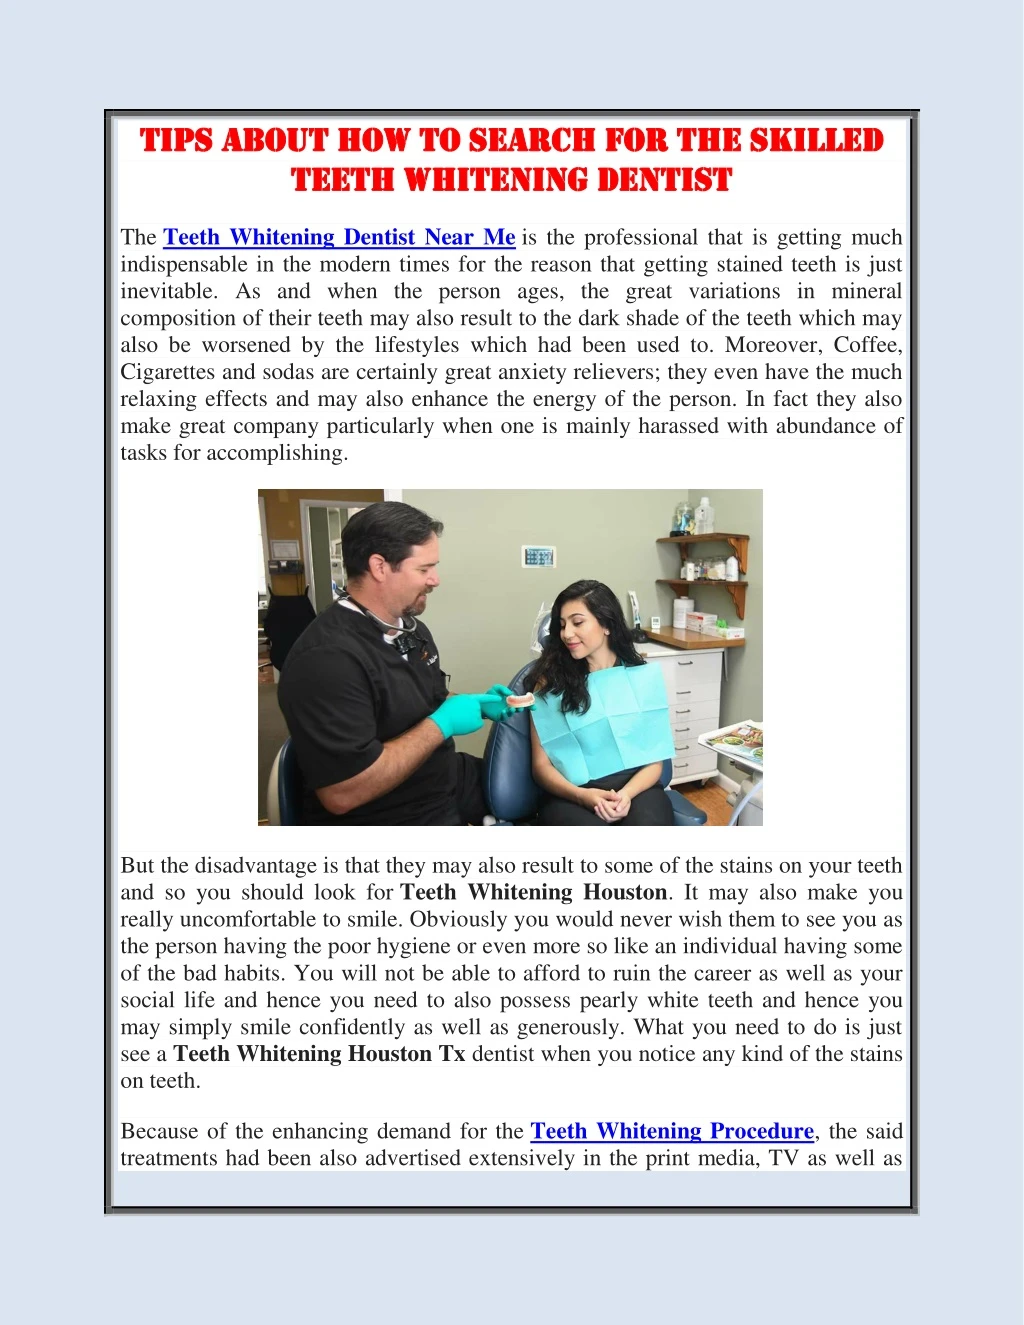 tip tips s about about how to teeth teeth whitenin